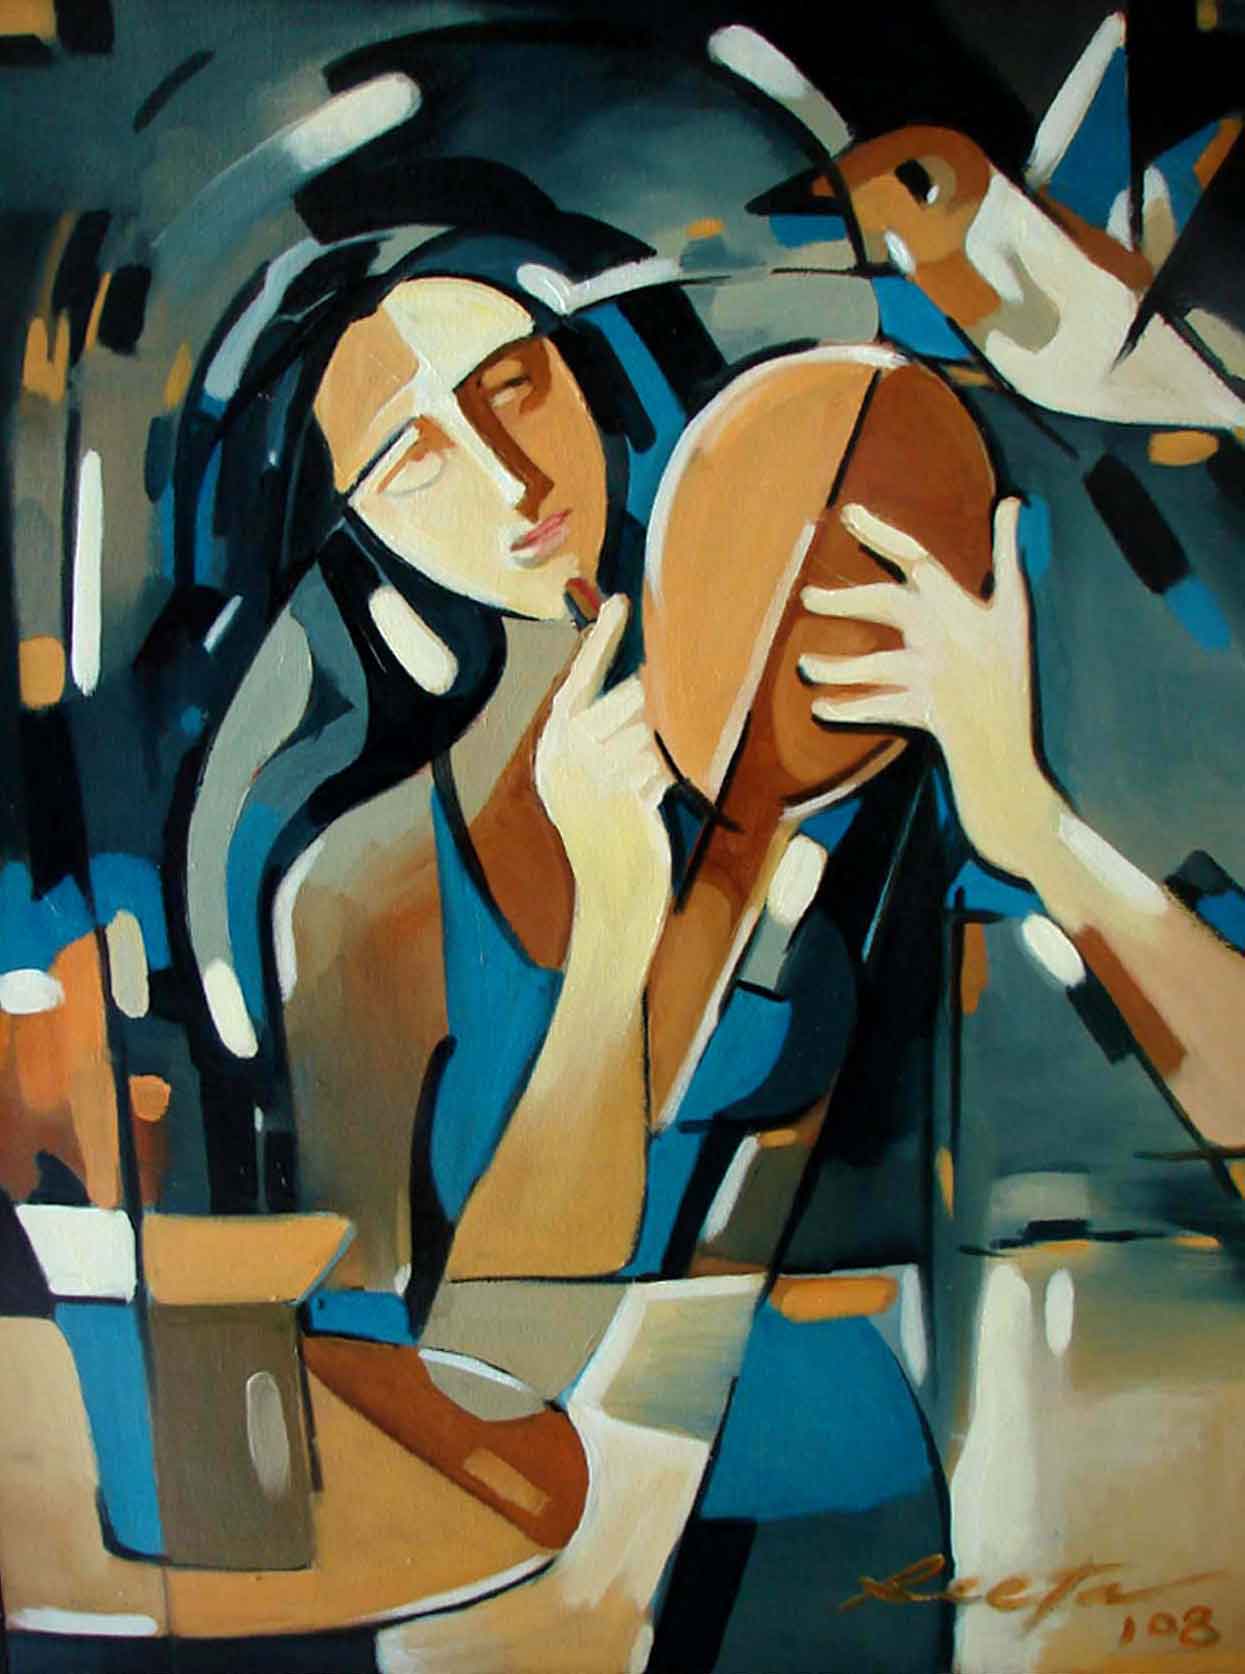 Figurative Painting with Oil on Canvas "Mirror Image" art by Rita Roy